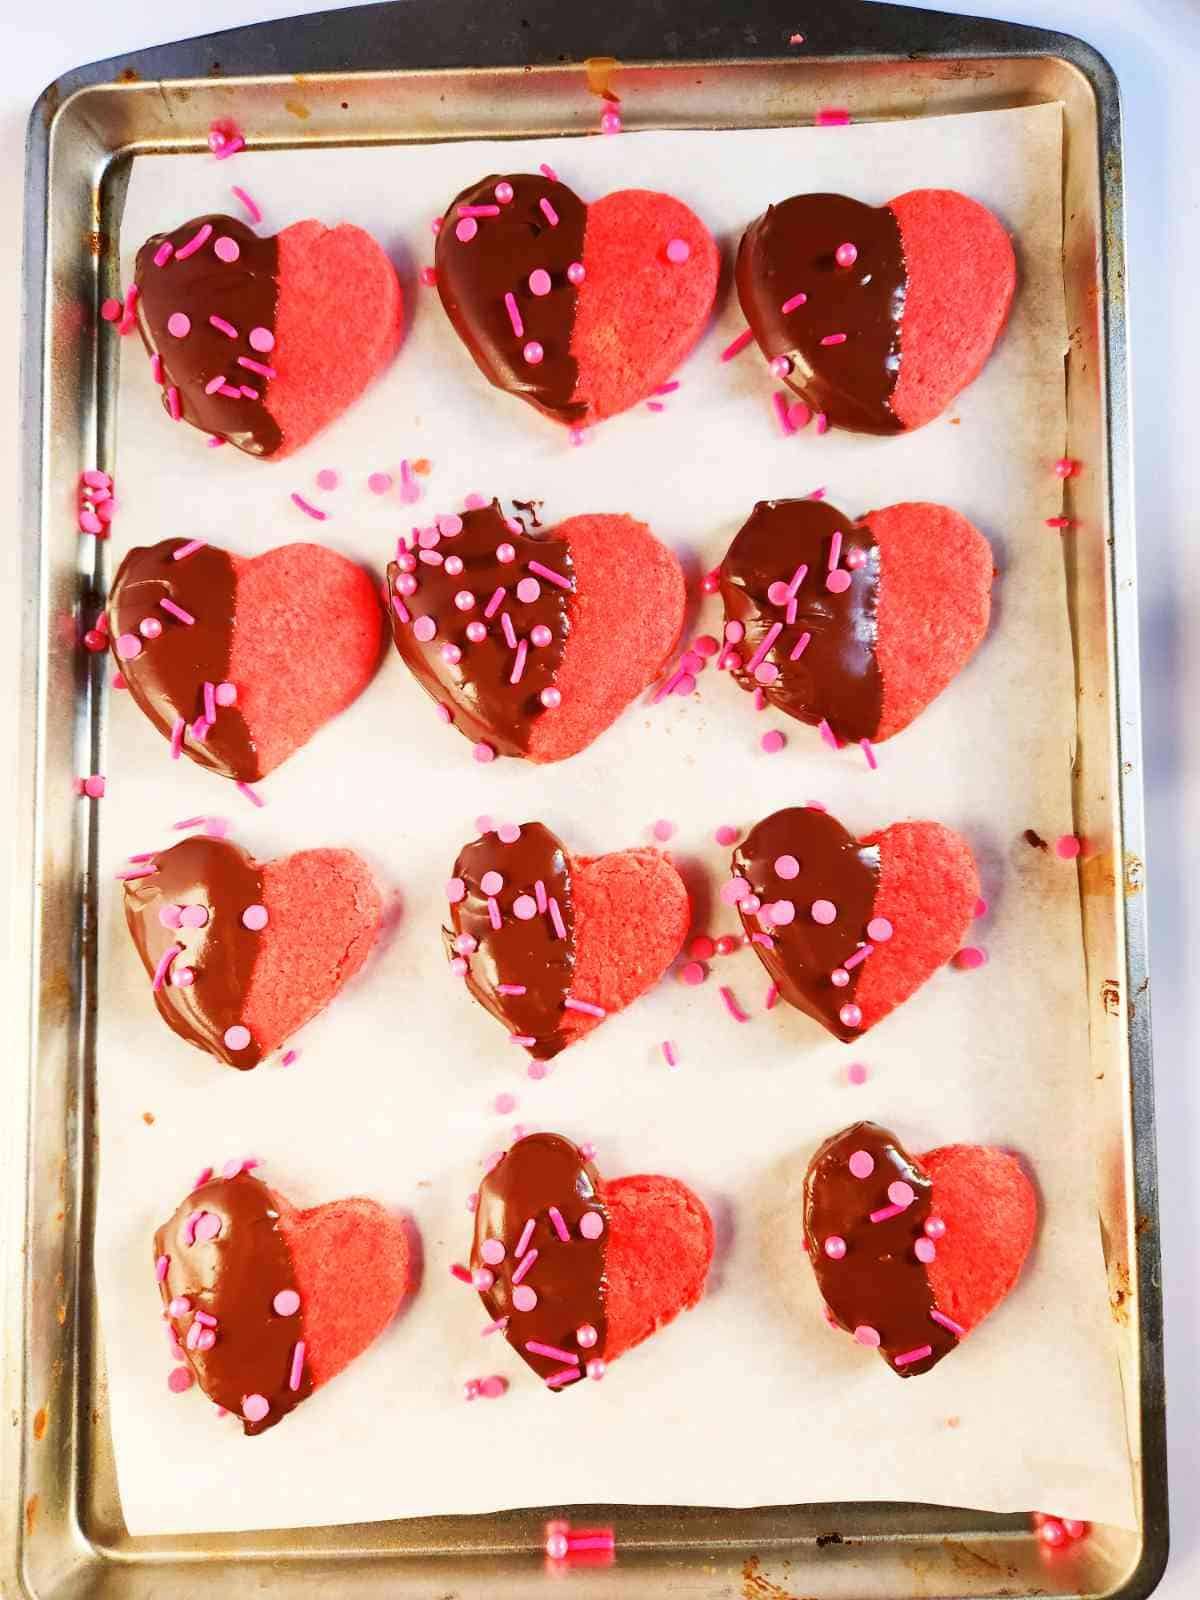 sprinkles on chocolate dipped pink heart cookies on a parchment lined baking sheet.